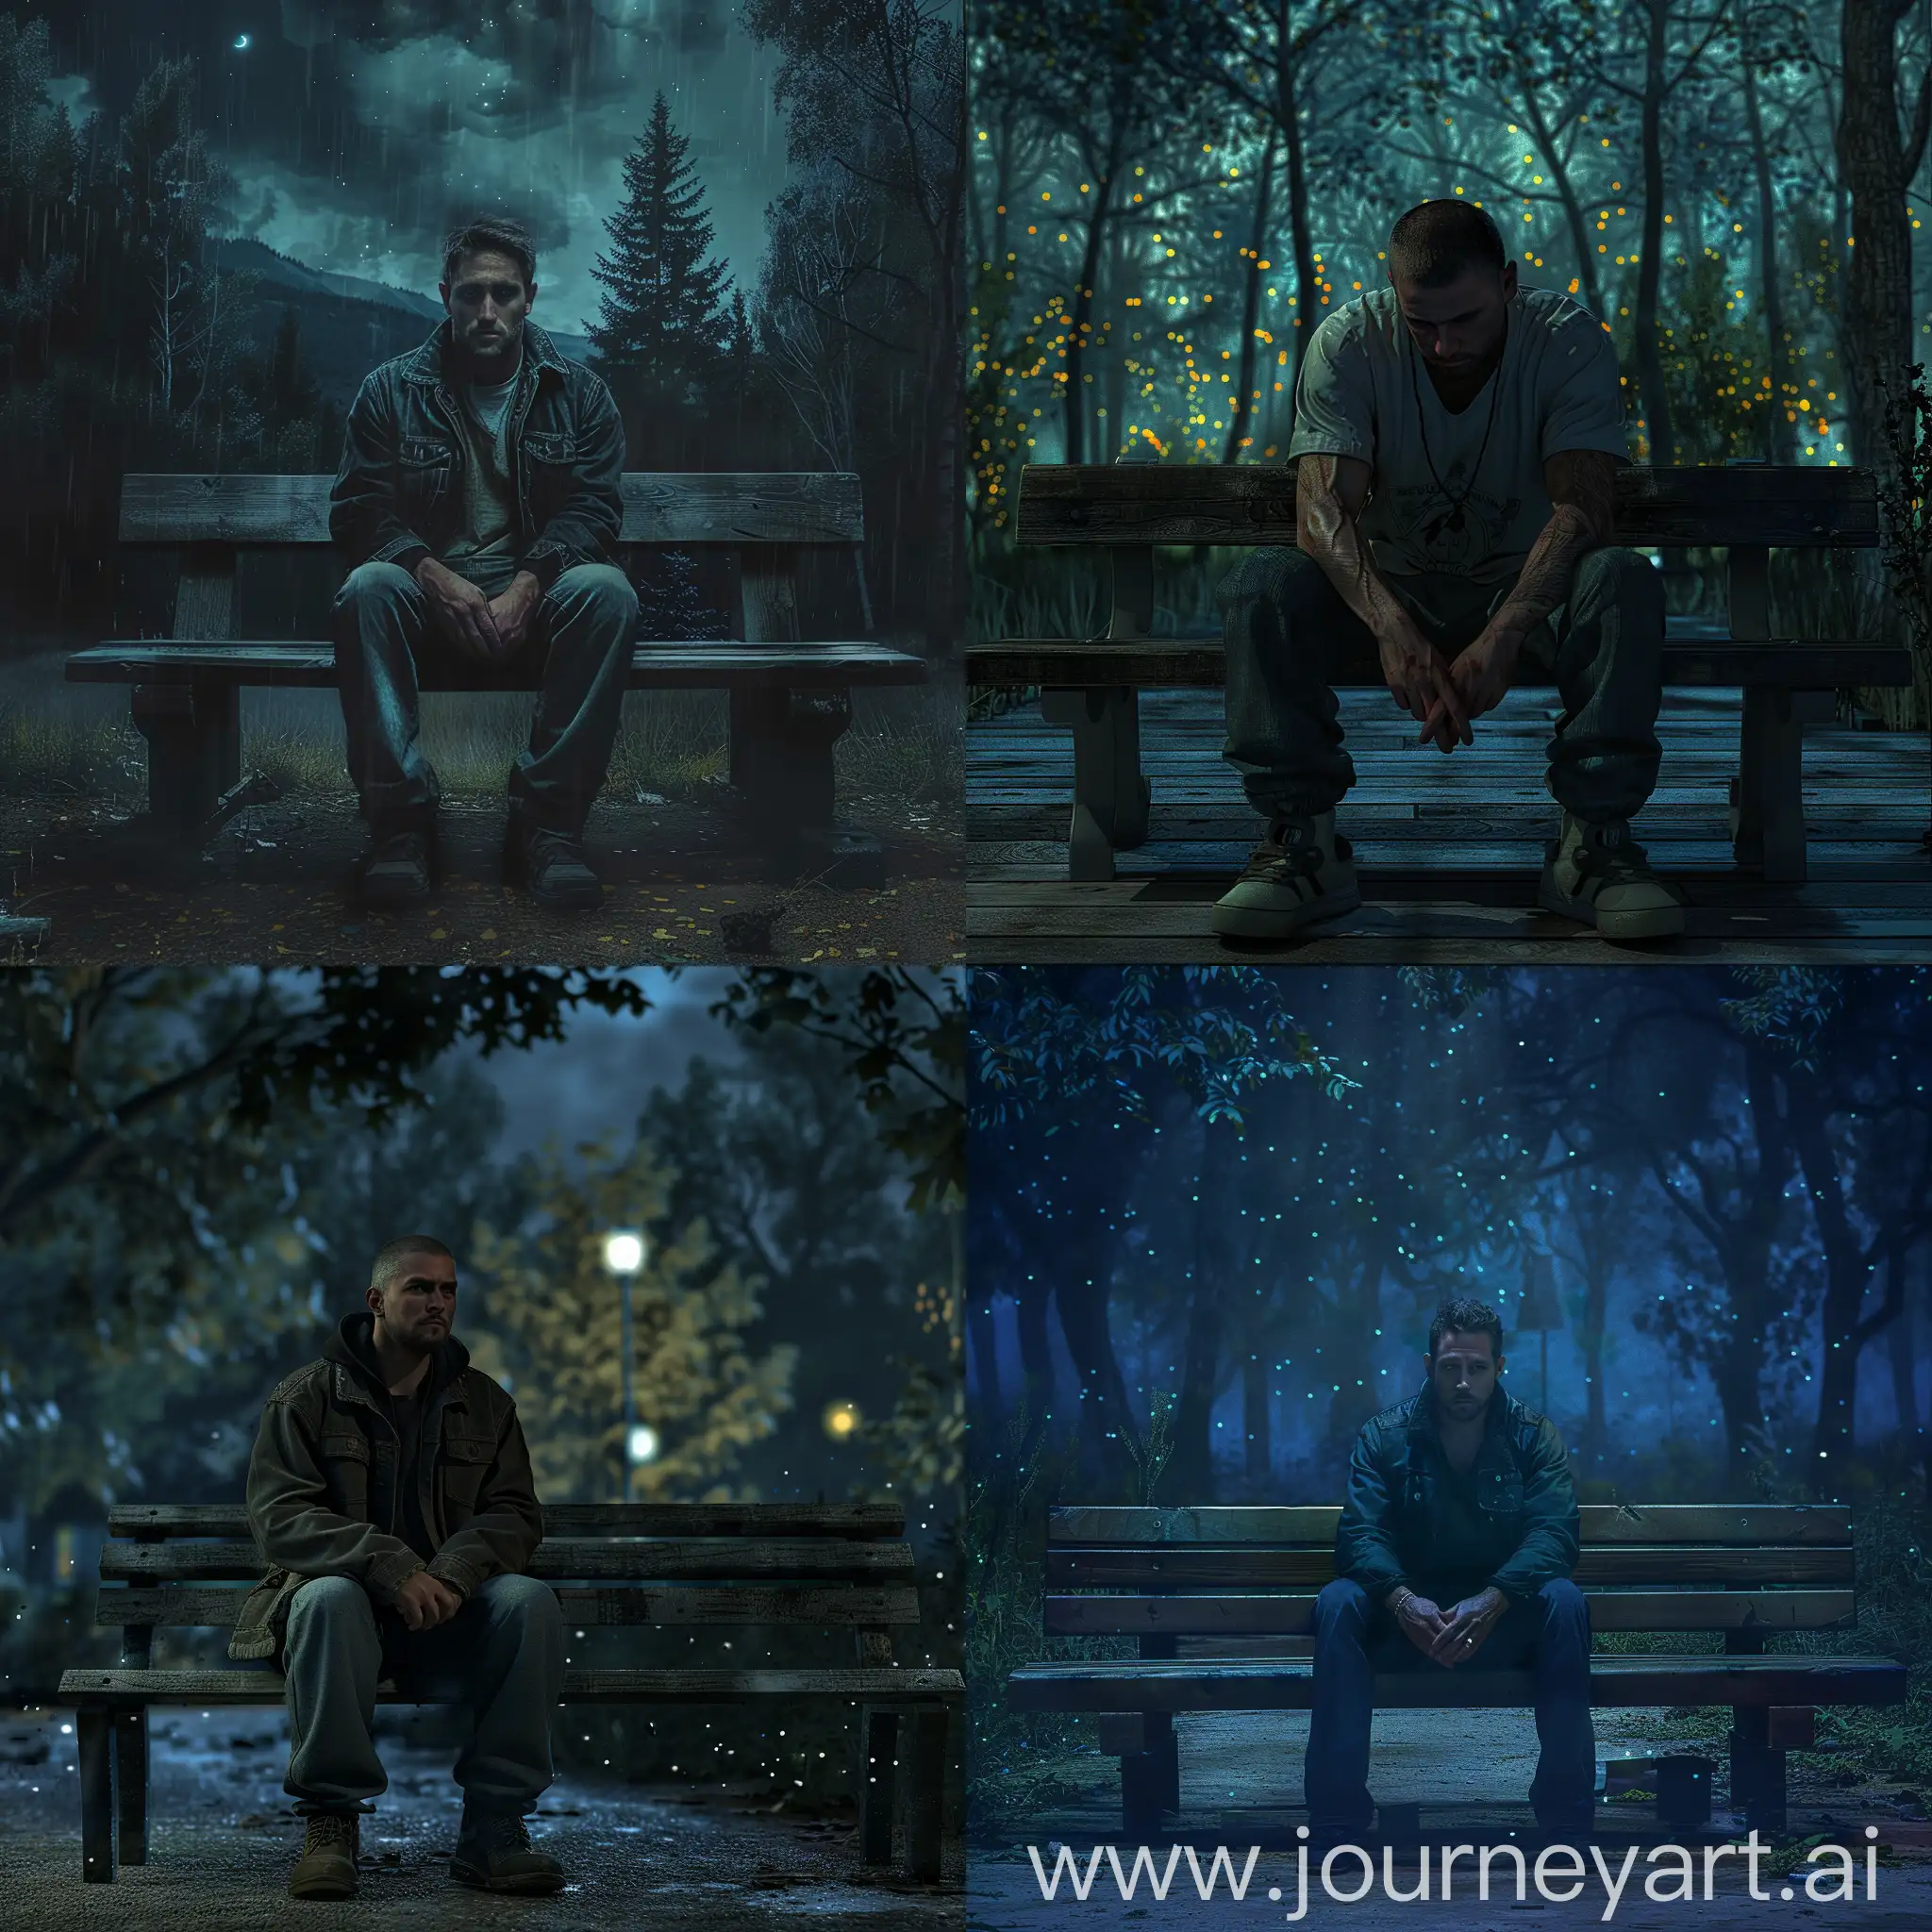 Tyler-Durden-Contemplating-in-Enchanted-Forest-at-Night